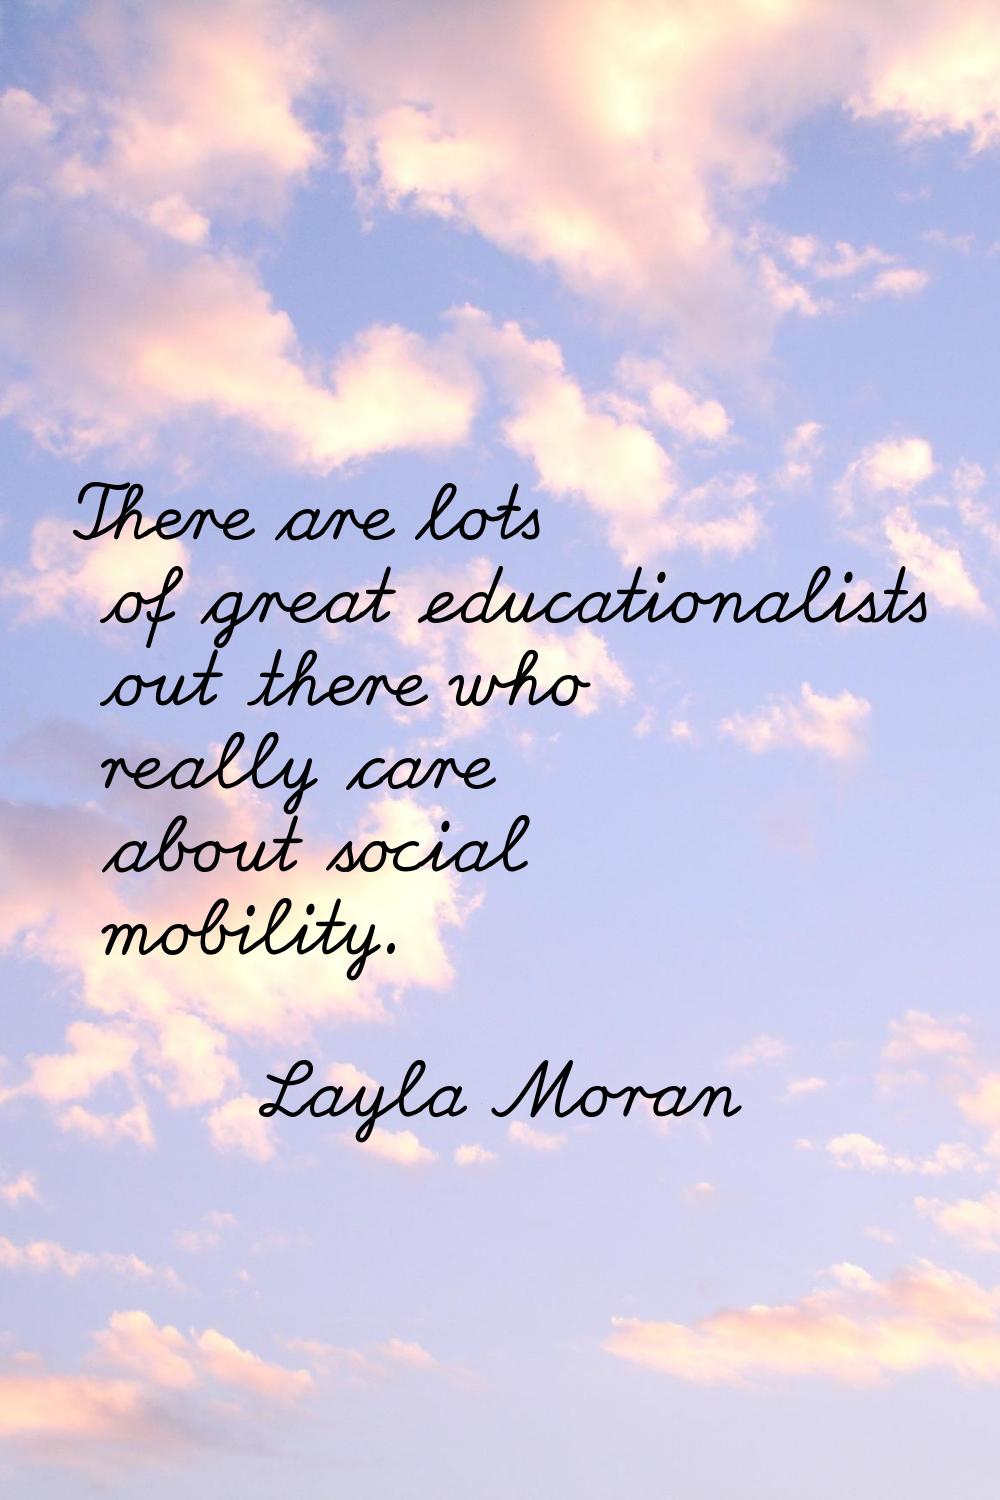 There are lots of great educationalists out there who really care about social mobility.